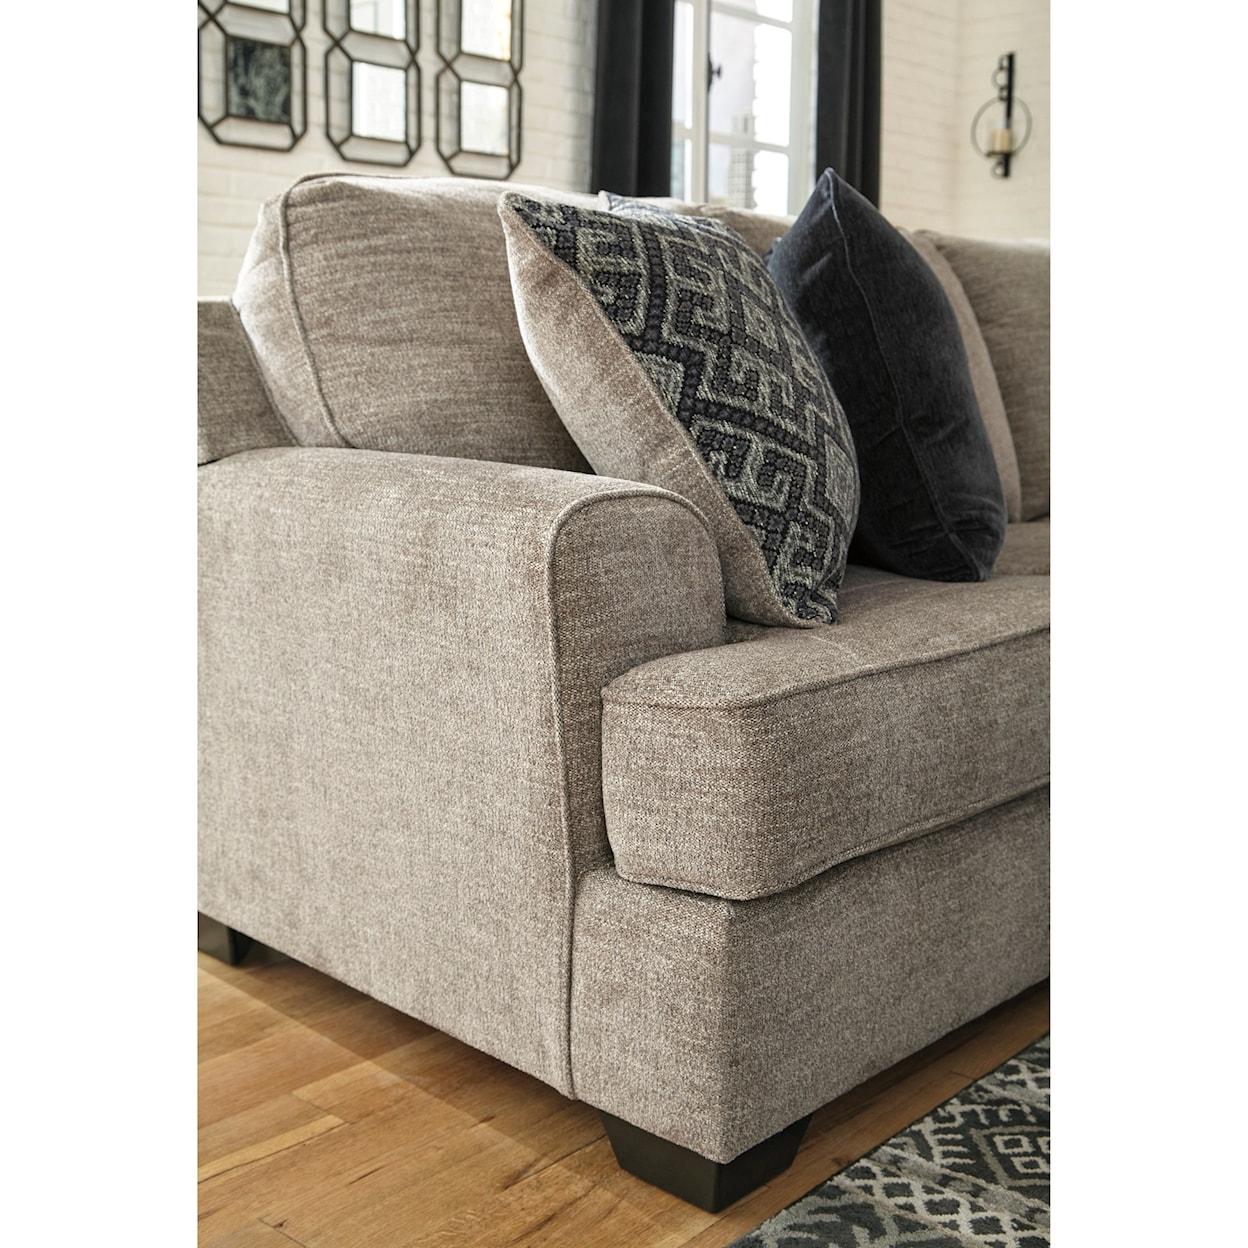 StyleLine Bovarian 3-Piece Sectional